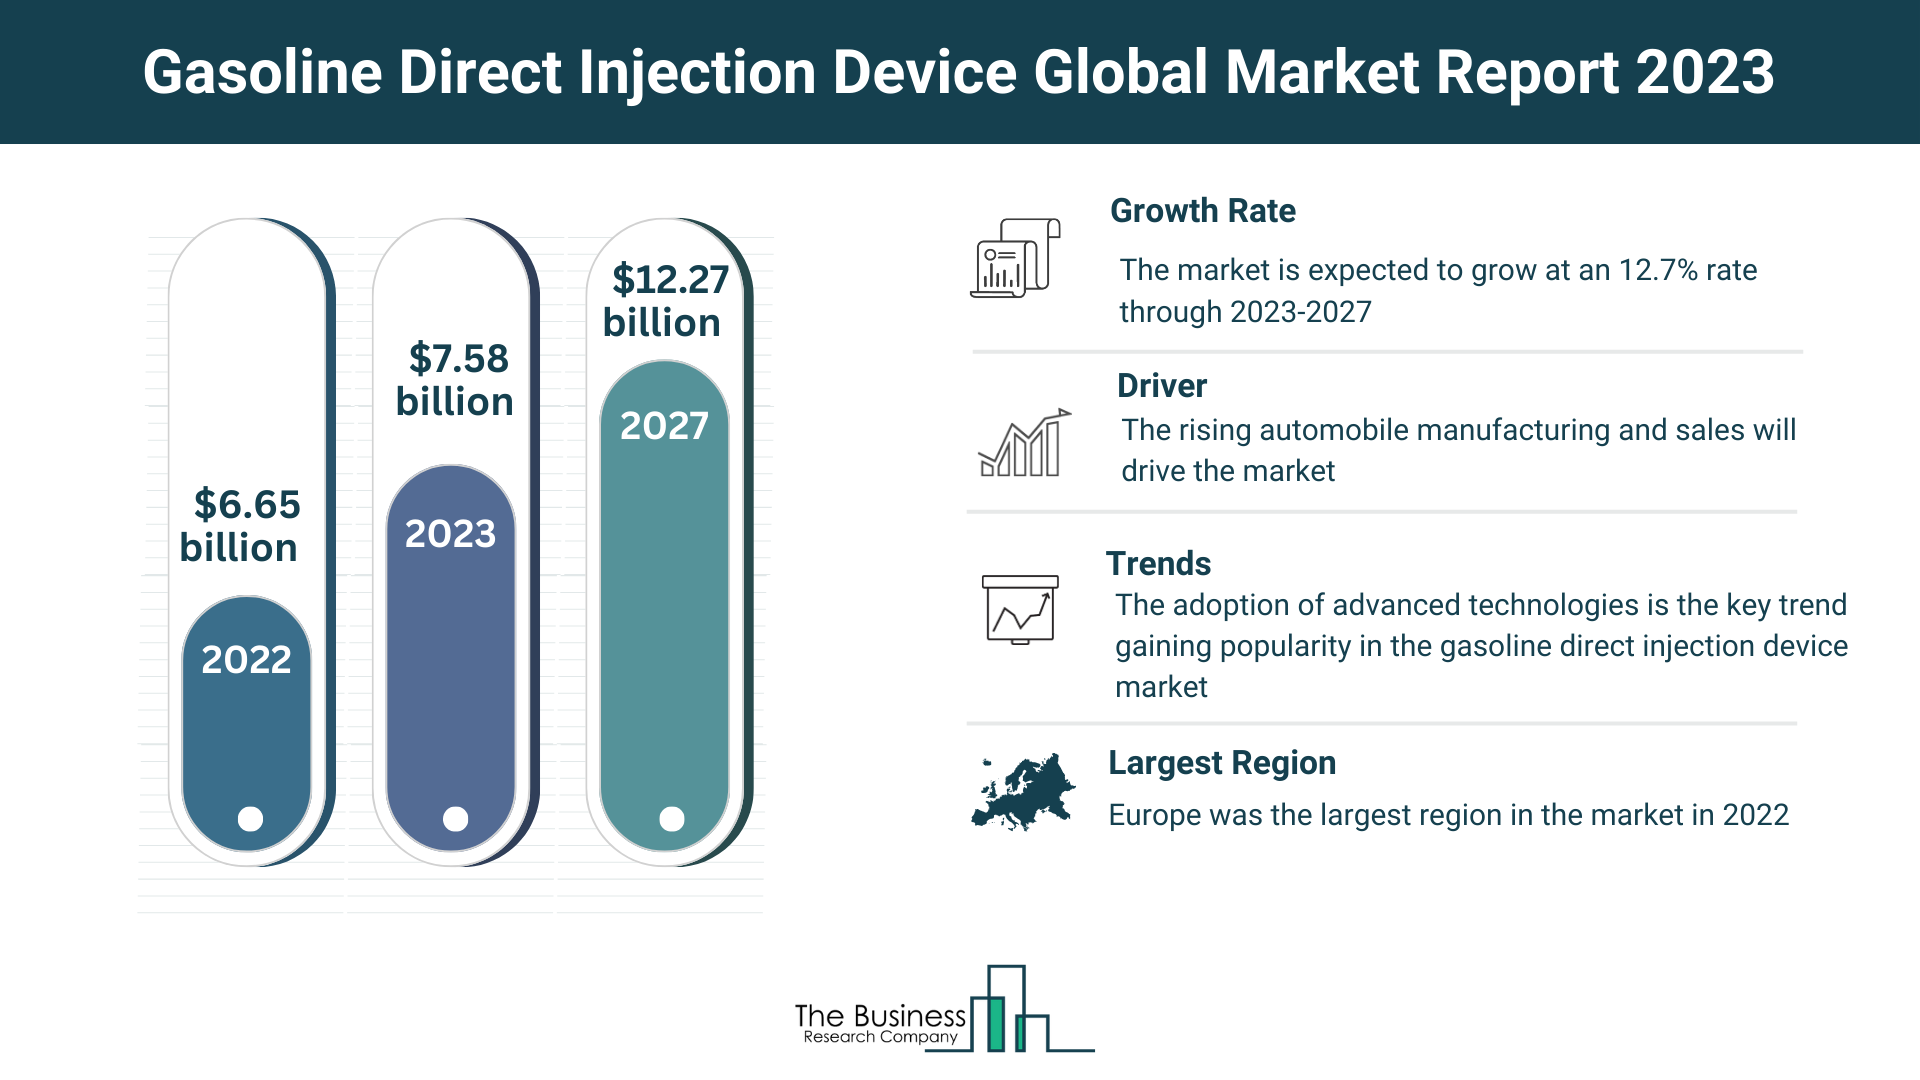 Gasoline Direct Injection (GDI) Device Market Overview: Market Size, Major Drivers And Trends